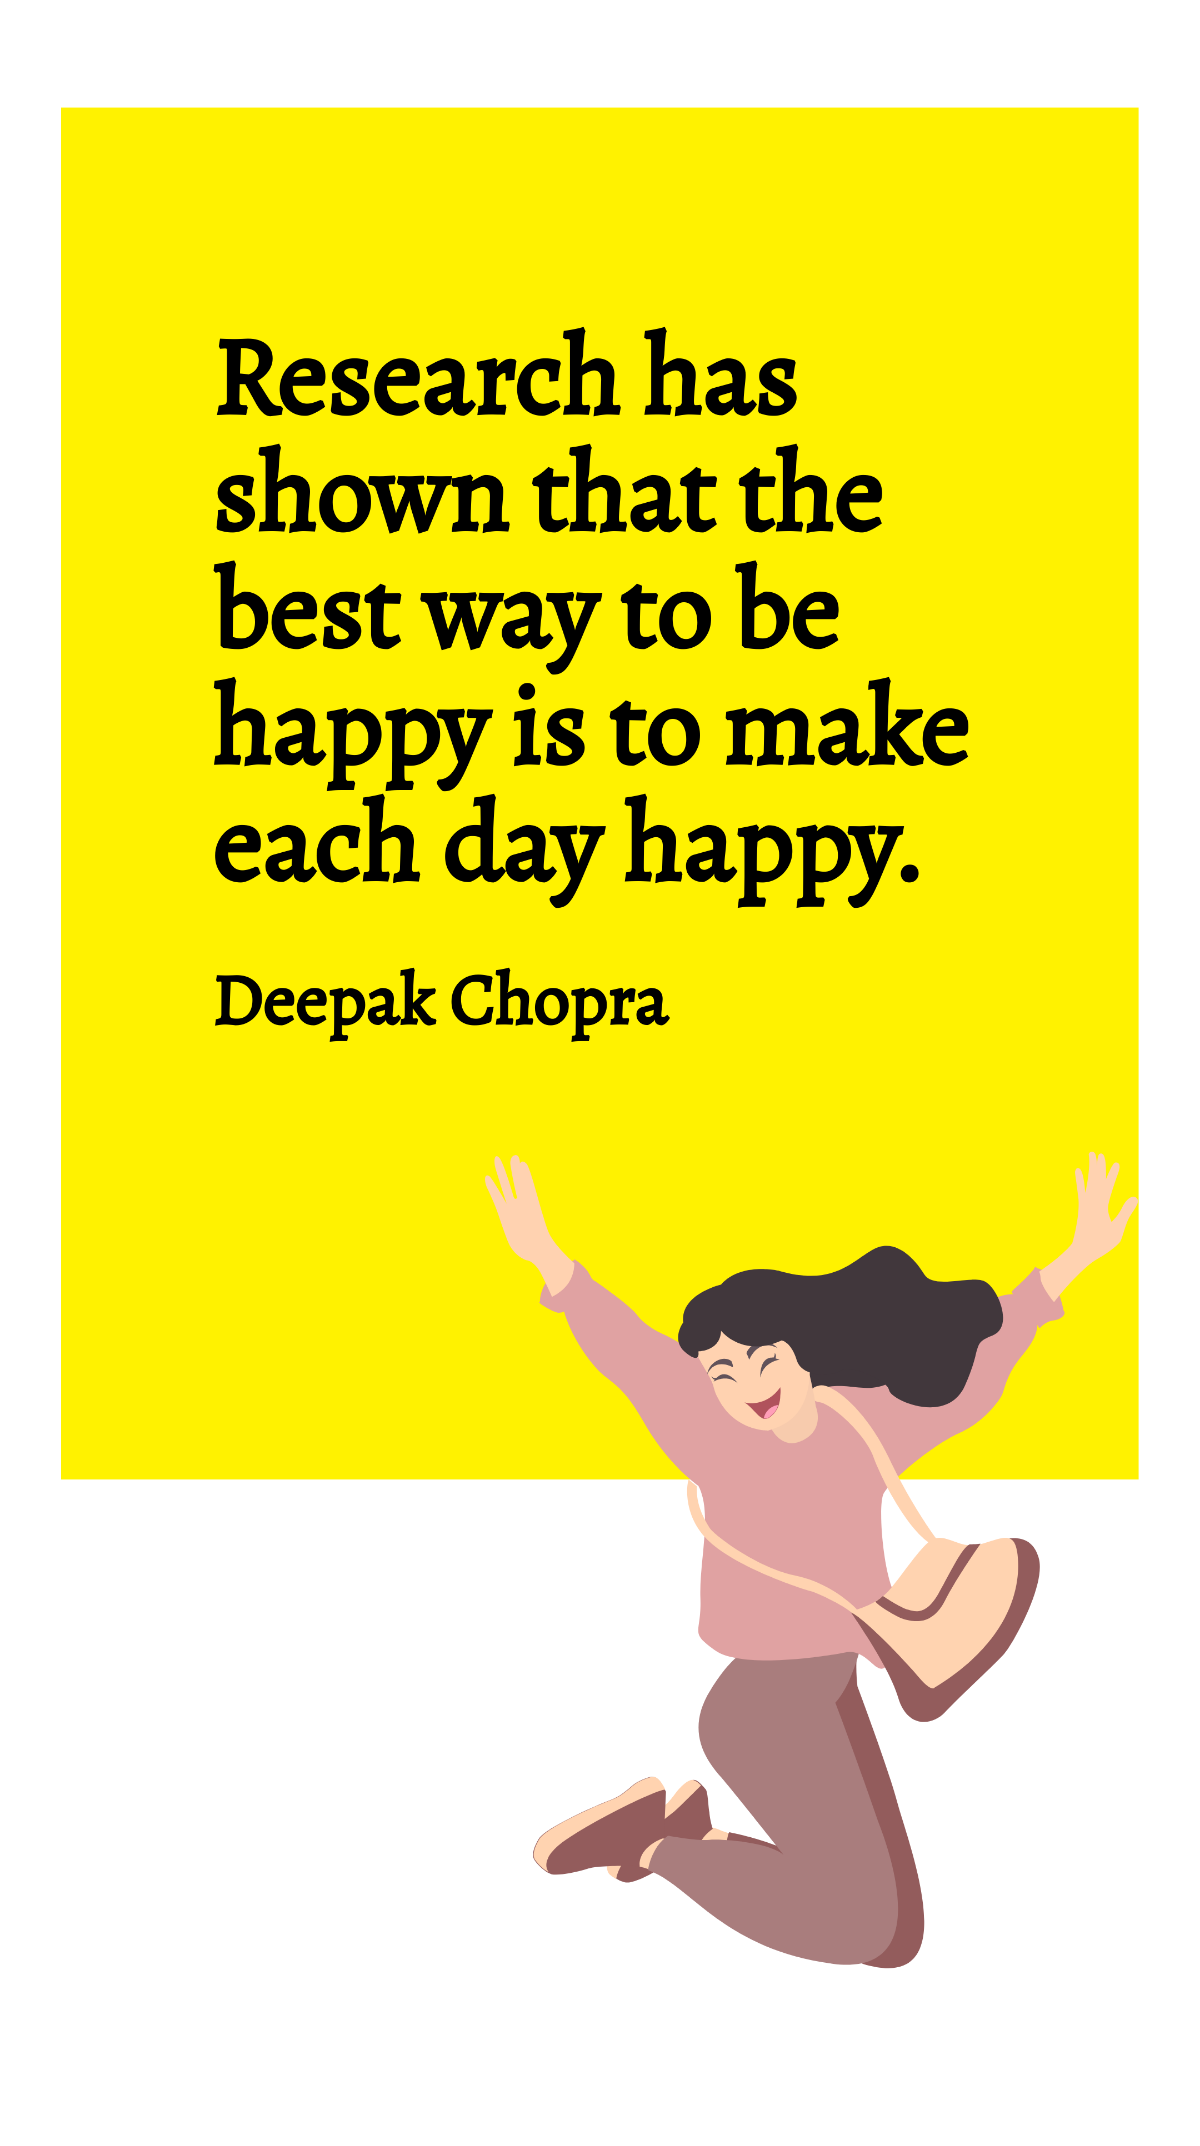 Deepak Chopra - Research has shown that the best way to be happy is to make each day happy. Template